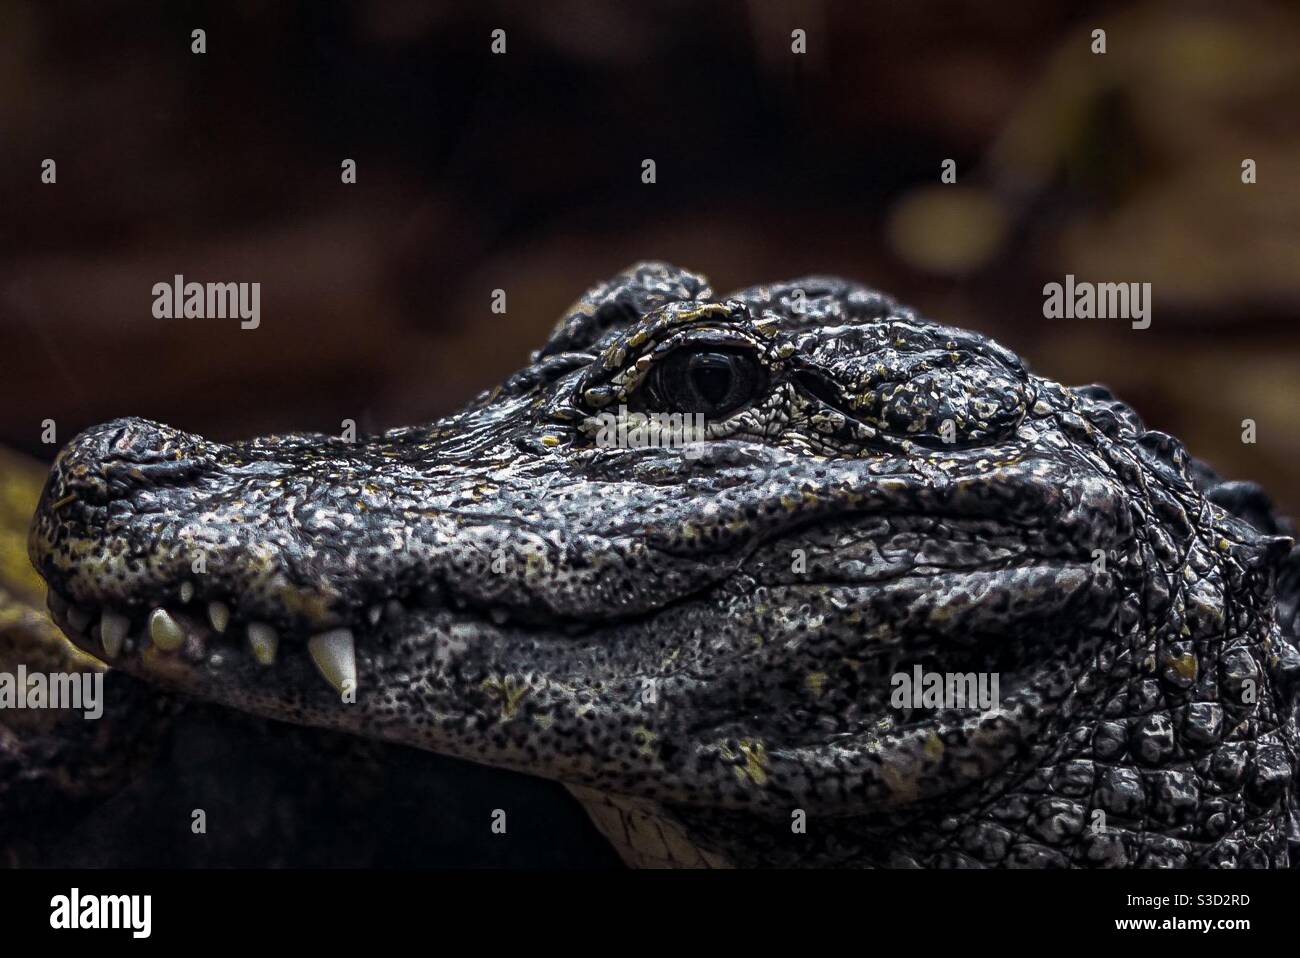 See You Later Alligator High Resolution Stock Photography And Images Alamy